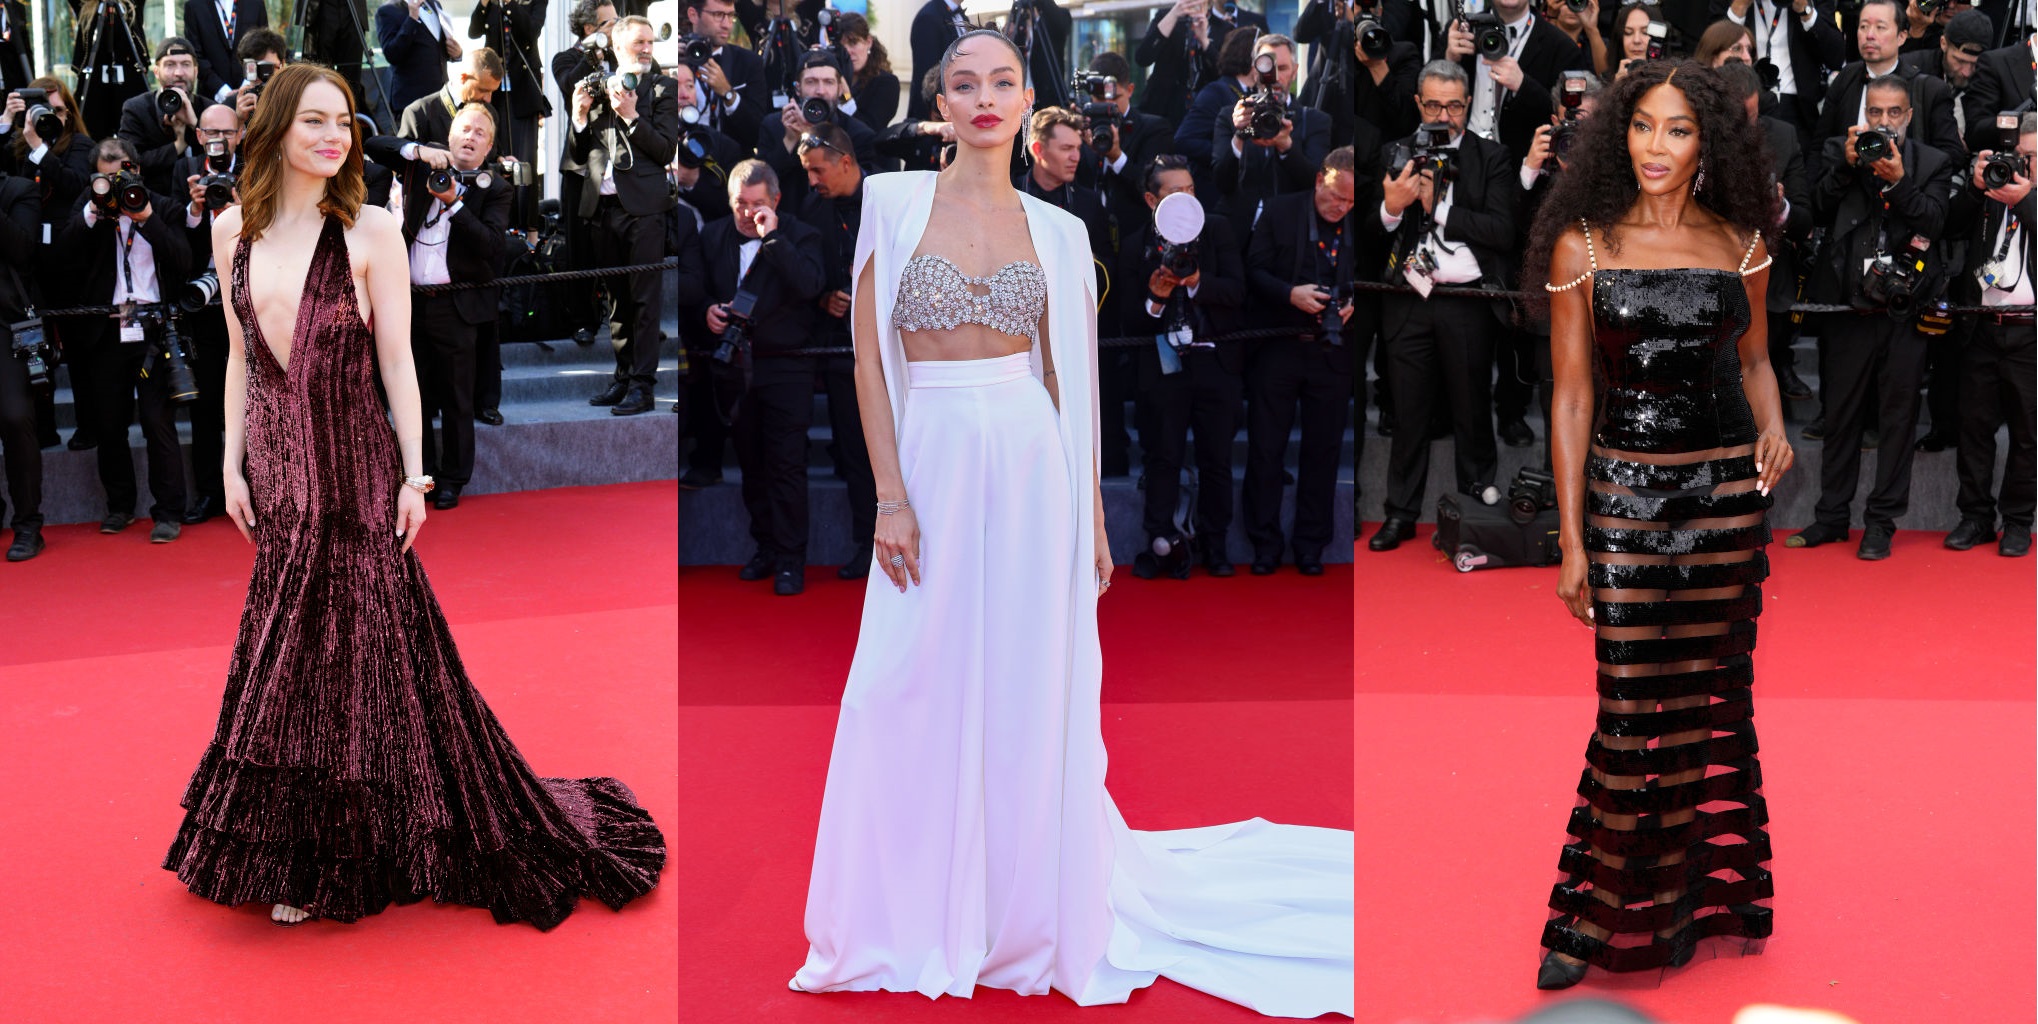 Celeb-inspired prom looks pulled straight from the Cannes red carpet